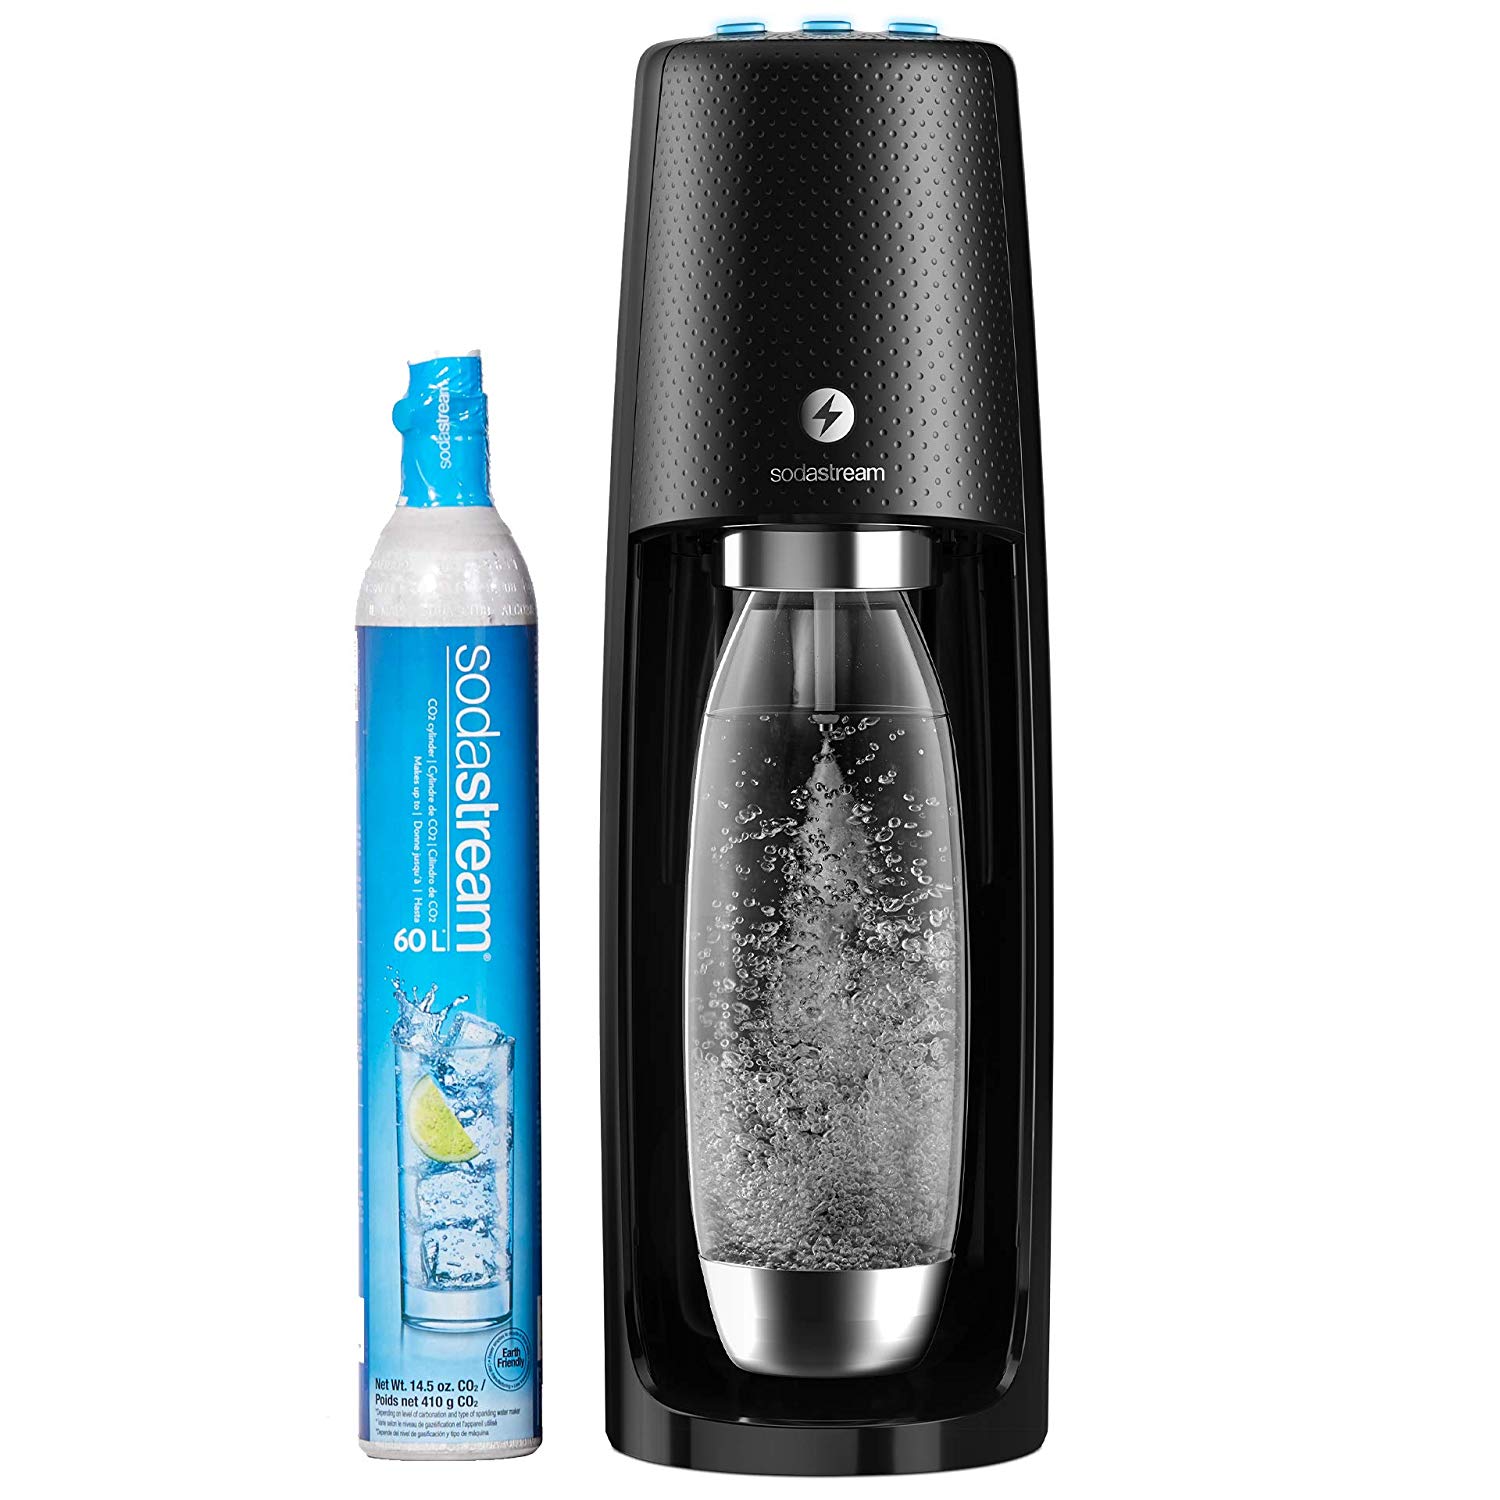 Amazon Lowest Price Sodastream Fizzi One Touch Sparkling Water Maker Black With Co2 And Bpa Free Bottle